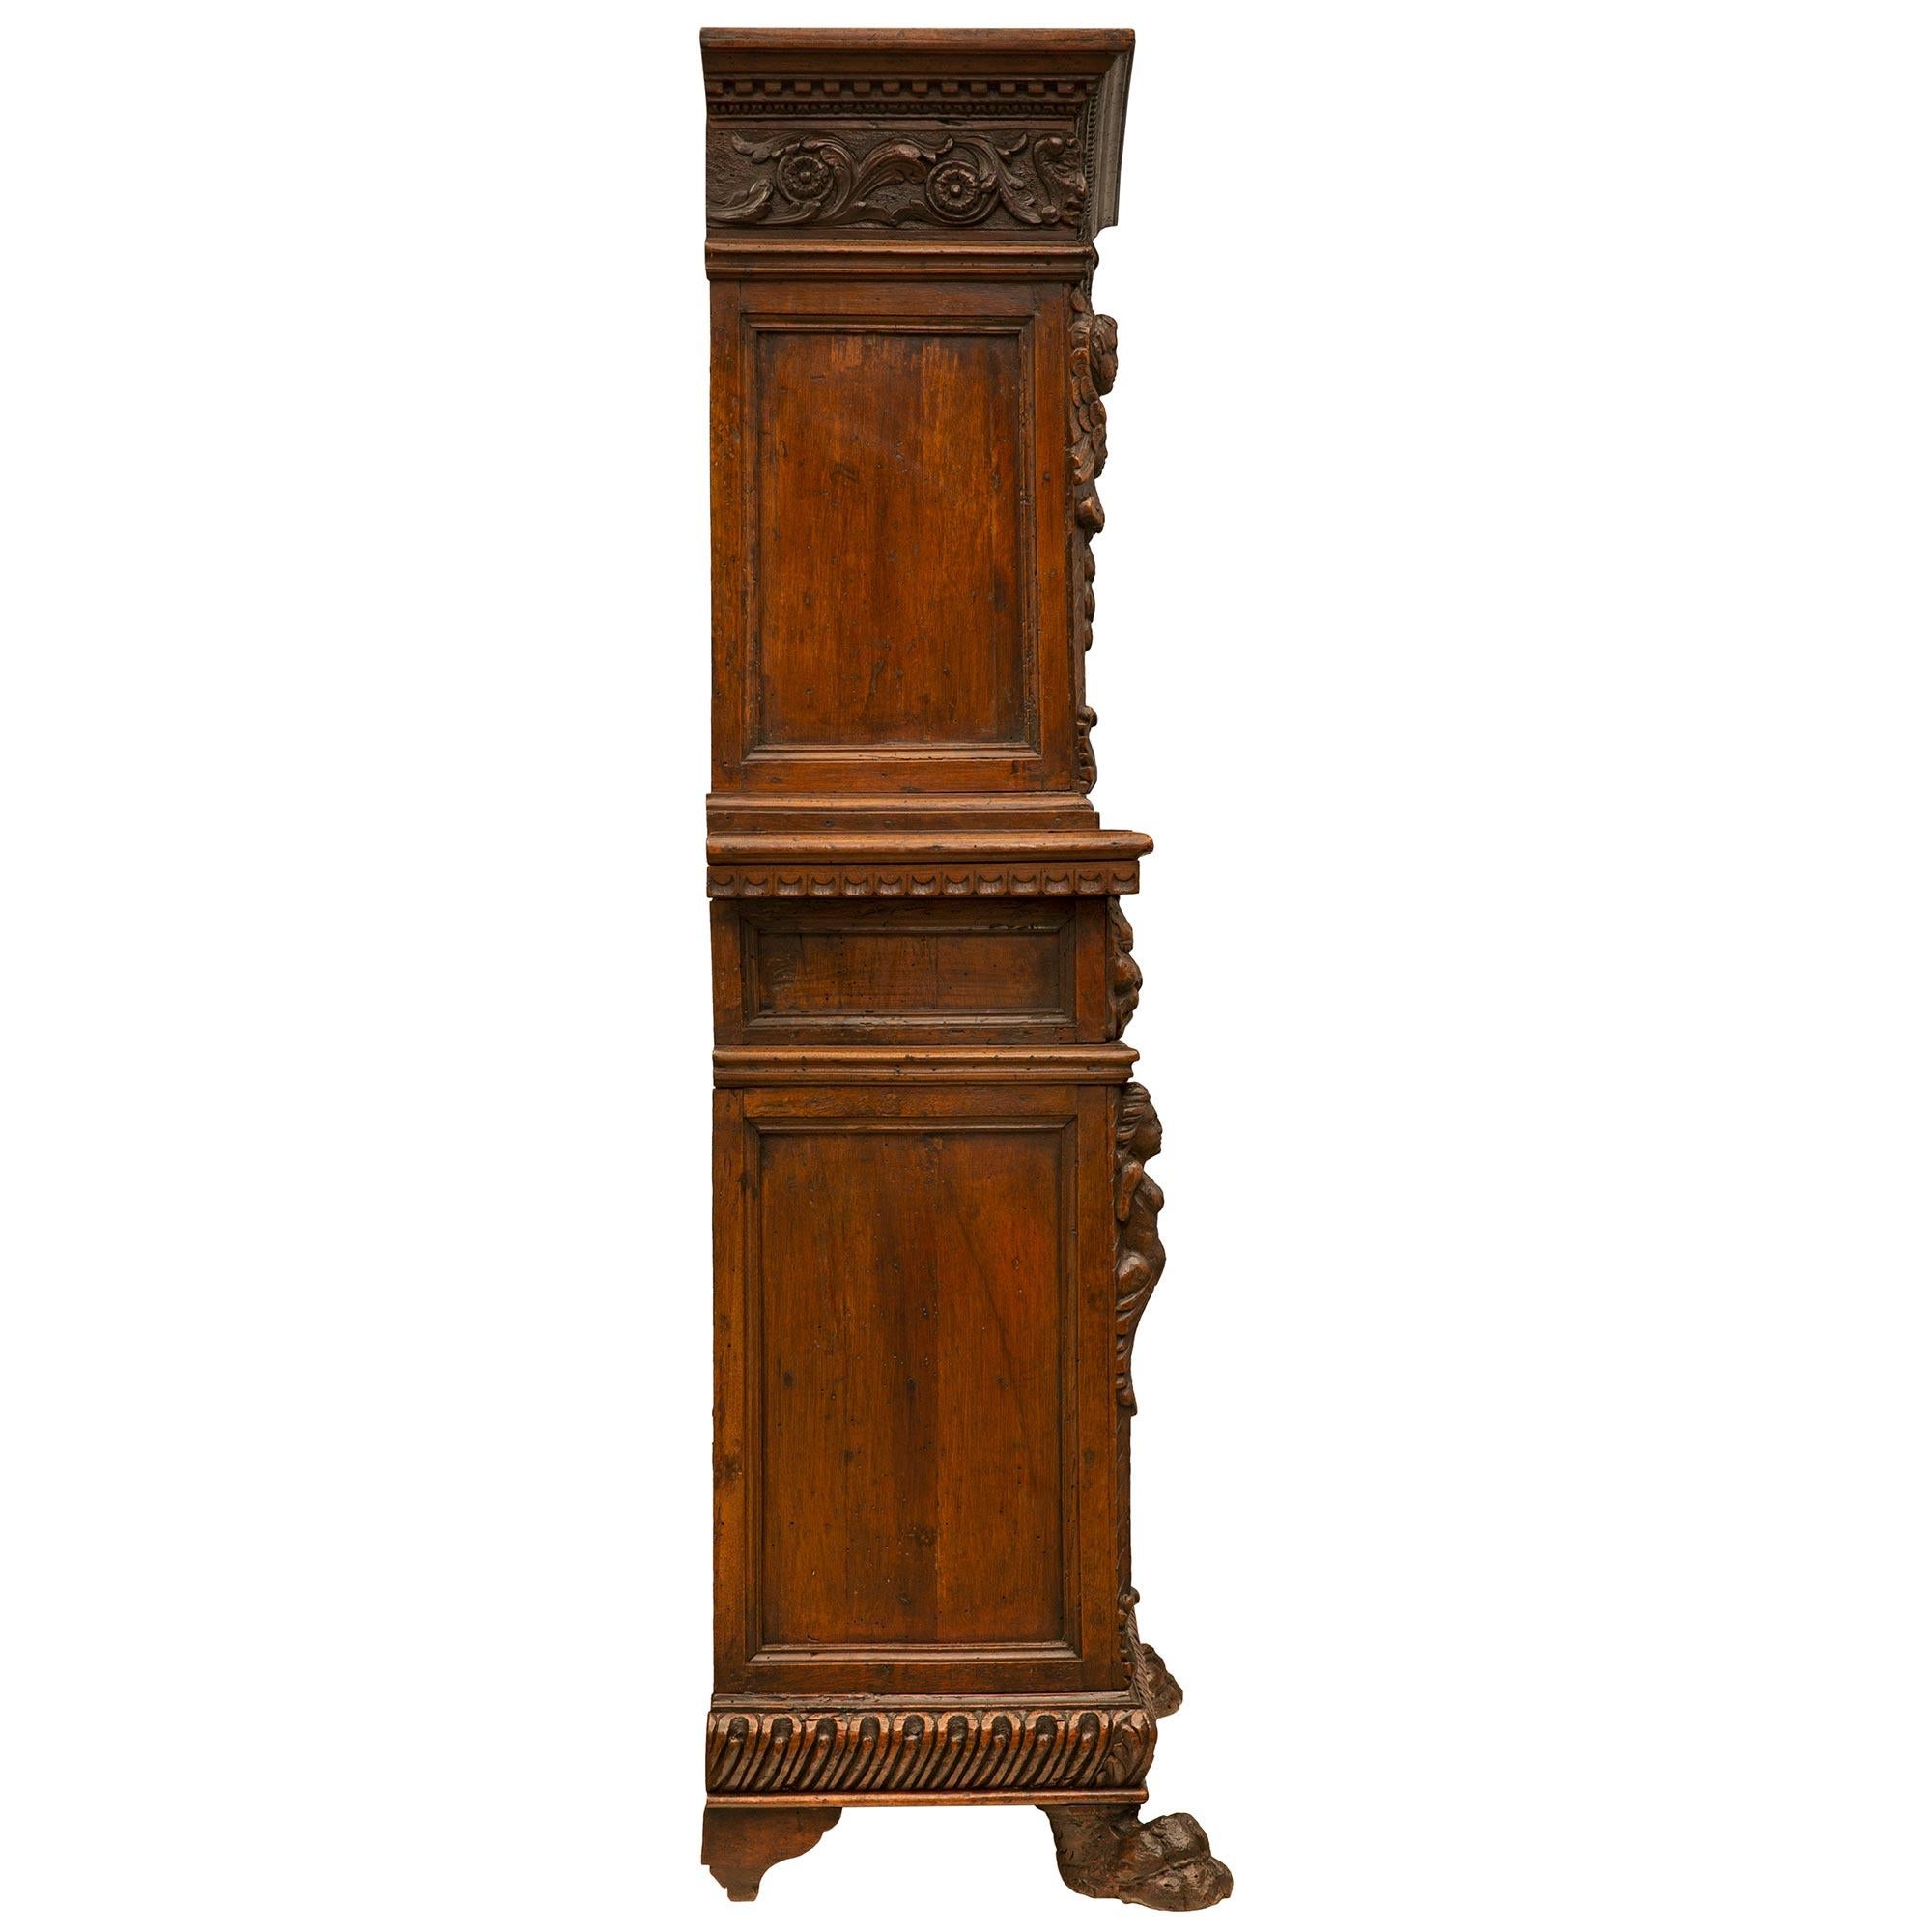 Italian 17th Century Baroque Period Walnut and Iron Specimen Cabinet In Good Condition For Sale In West Palm Beach, FL